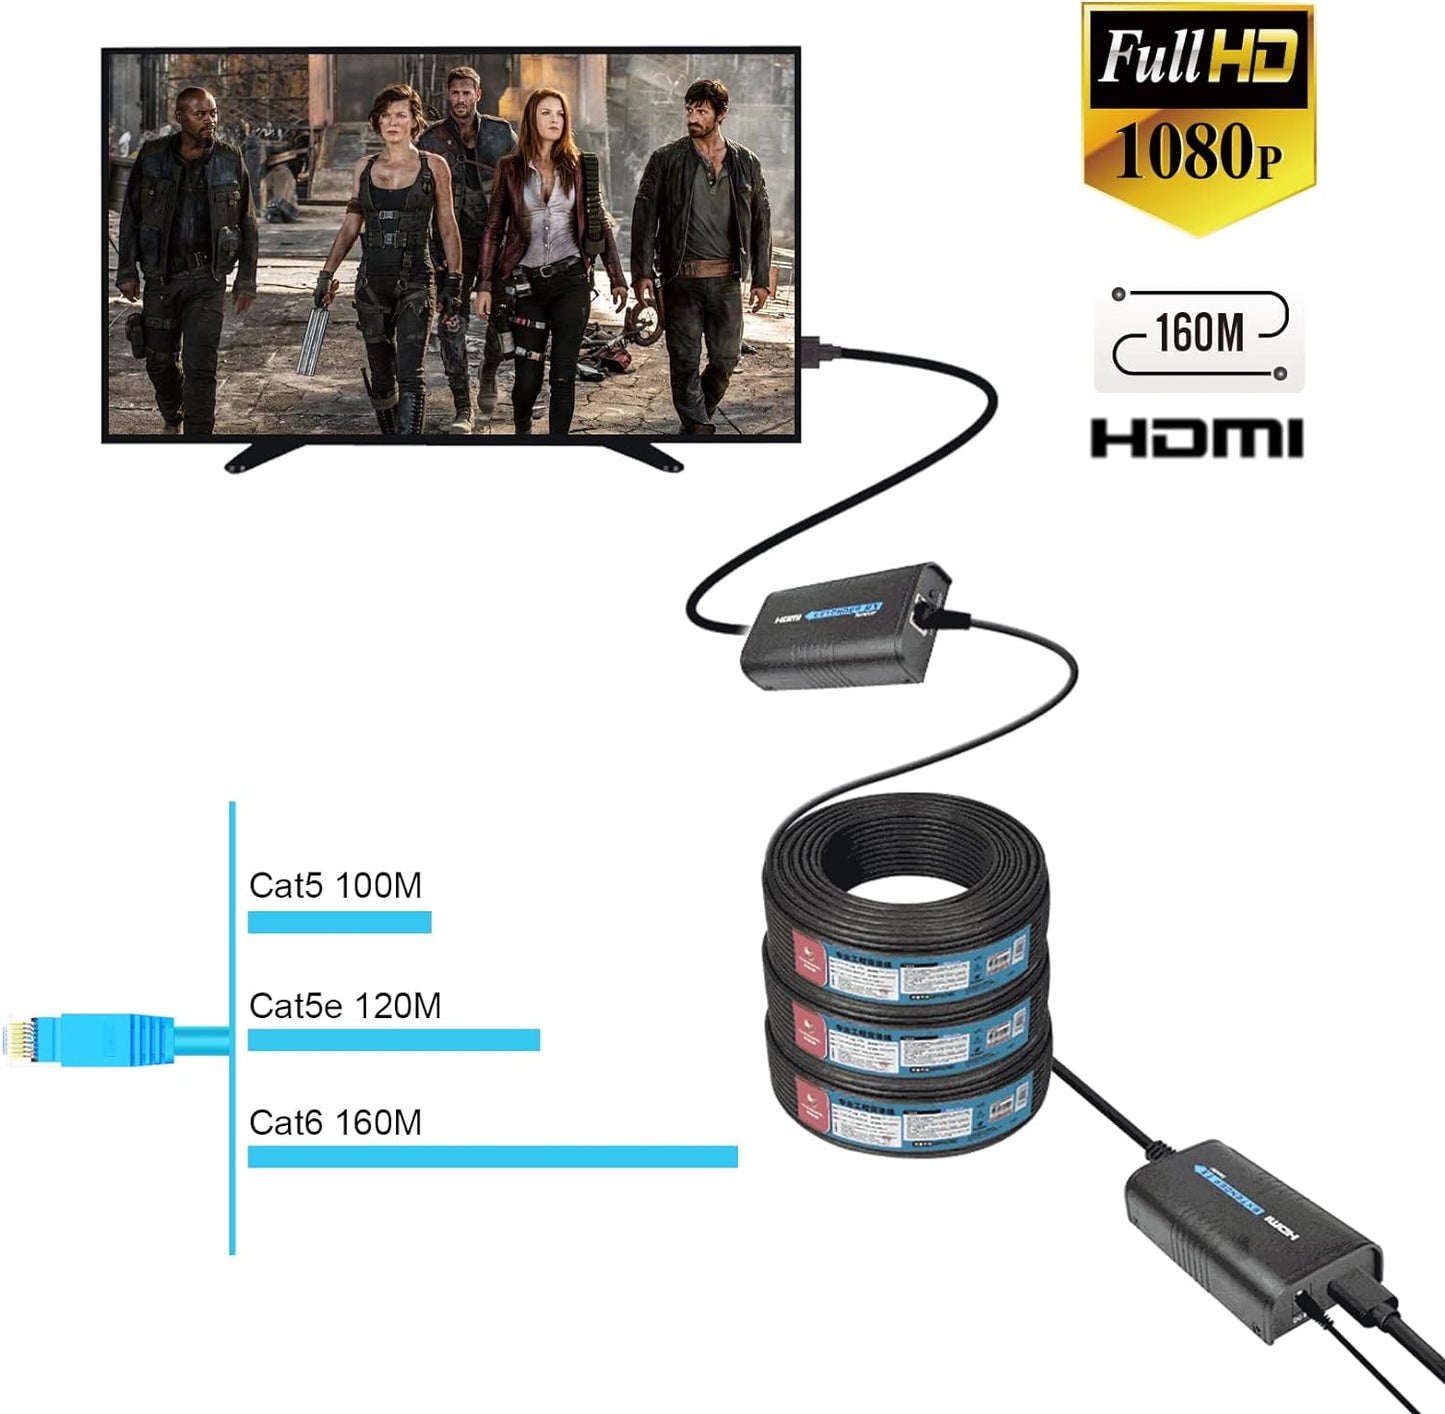 HDMI Extender 400Ft(120M),1 to Many over IP LAN Switch,1080P@60Hz Full HD Video and Audio by Single Cat5 Cat5E Cat6 Cat6E Cat7 Cable,Transmitter and Receiver